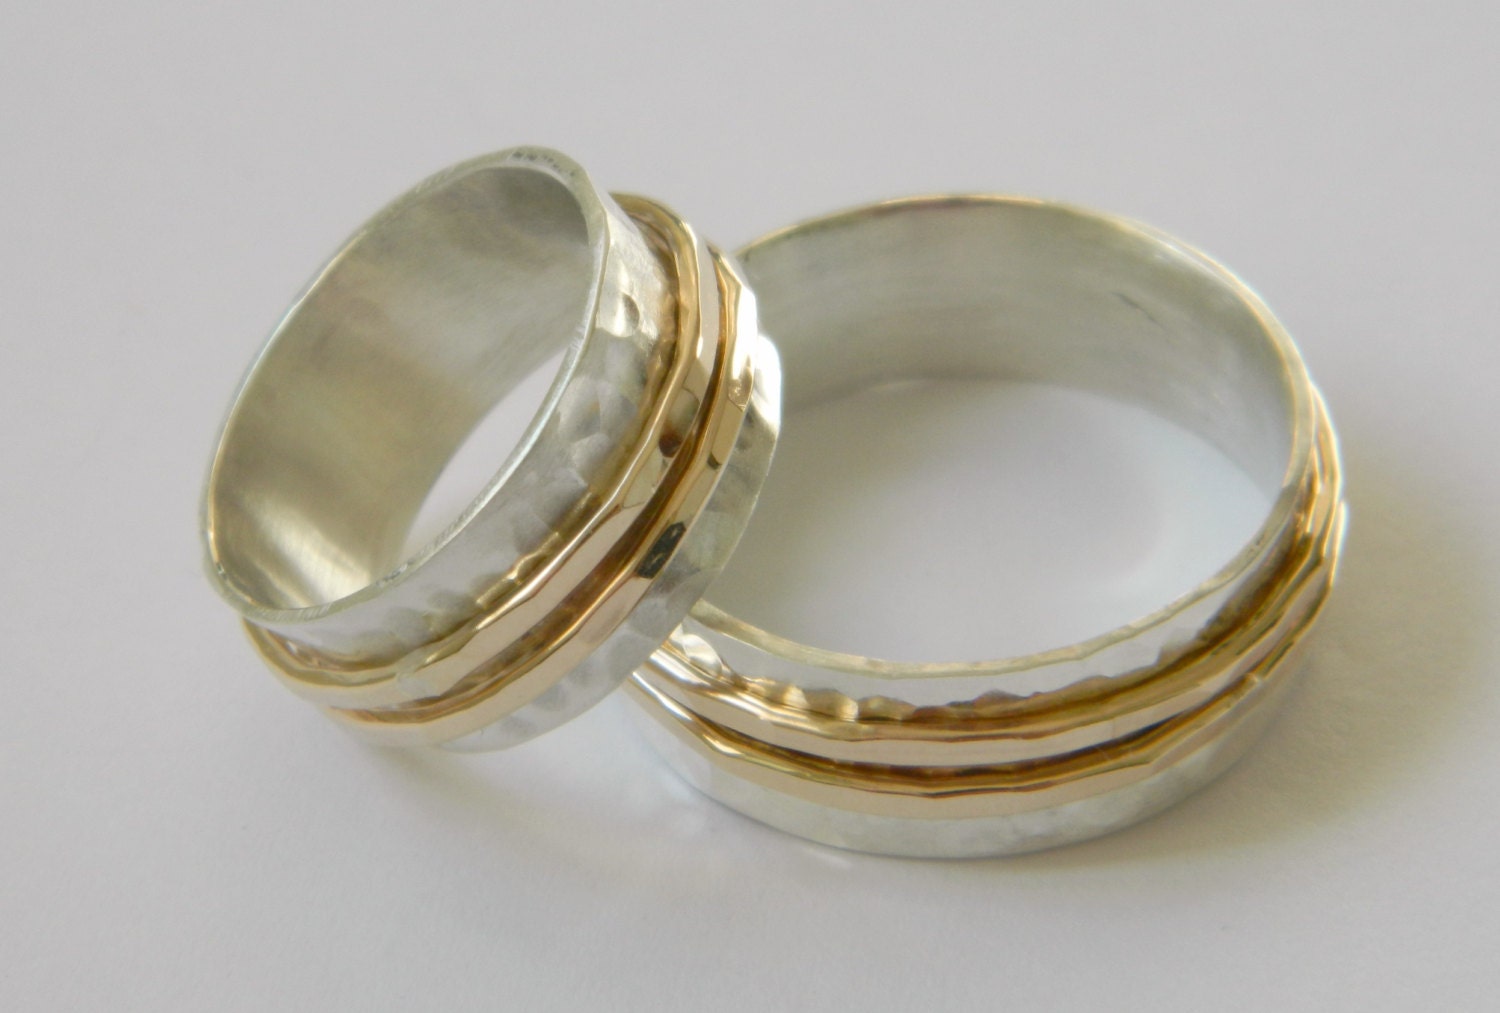 Hammered wedding bands 8mm wide silver wedding bands by 